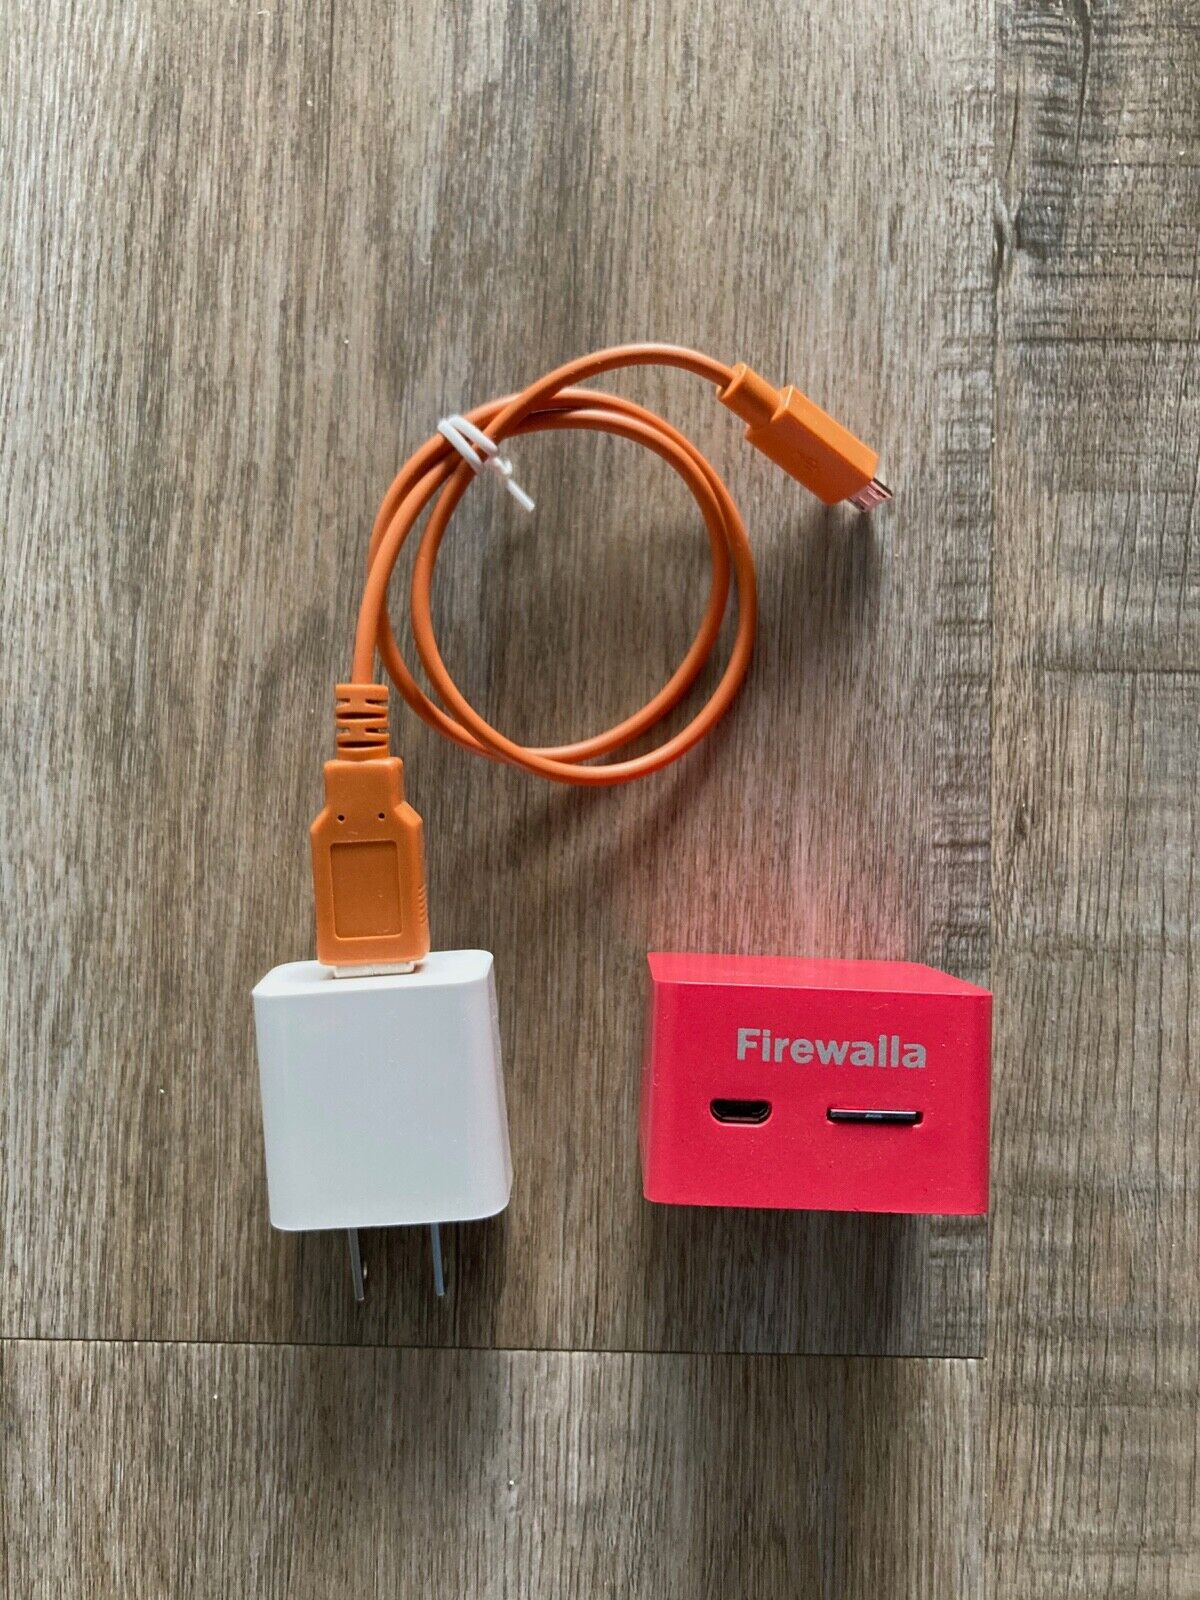 Firewalla Red iOS Home Network Firewall Intrusion Detection Router VPN Appliance